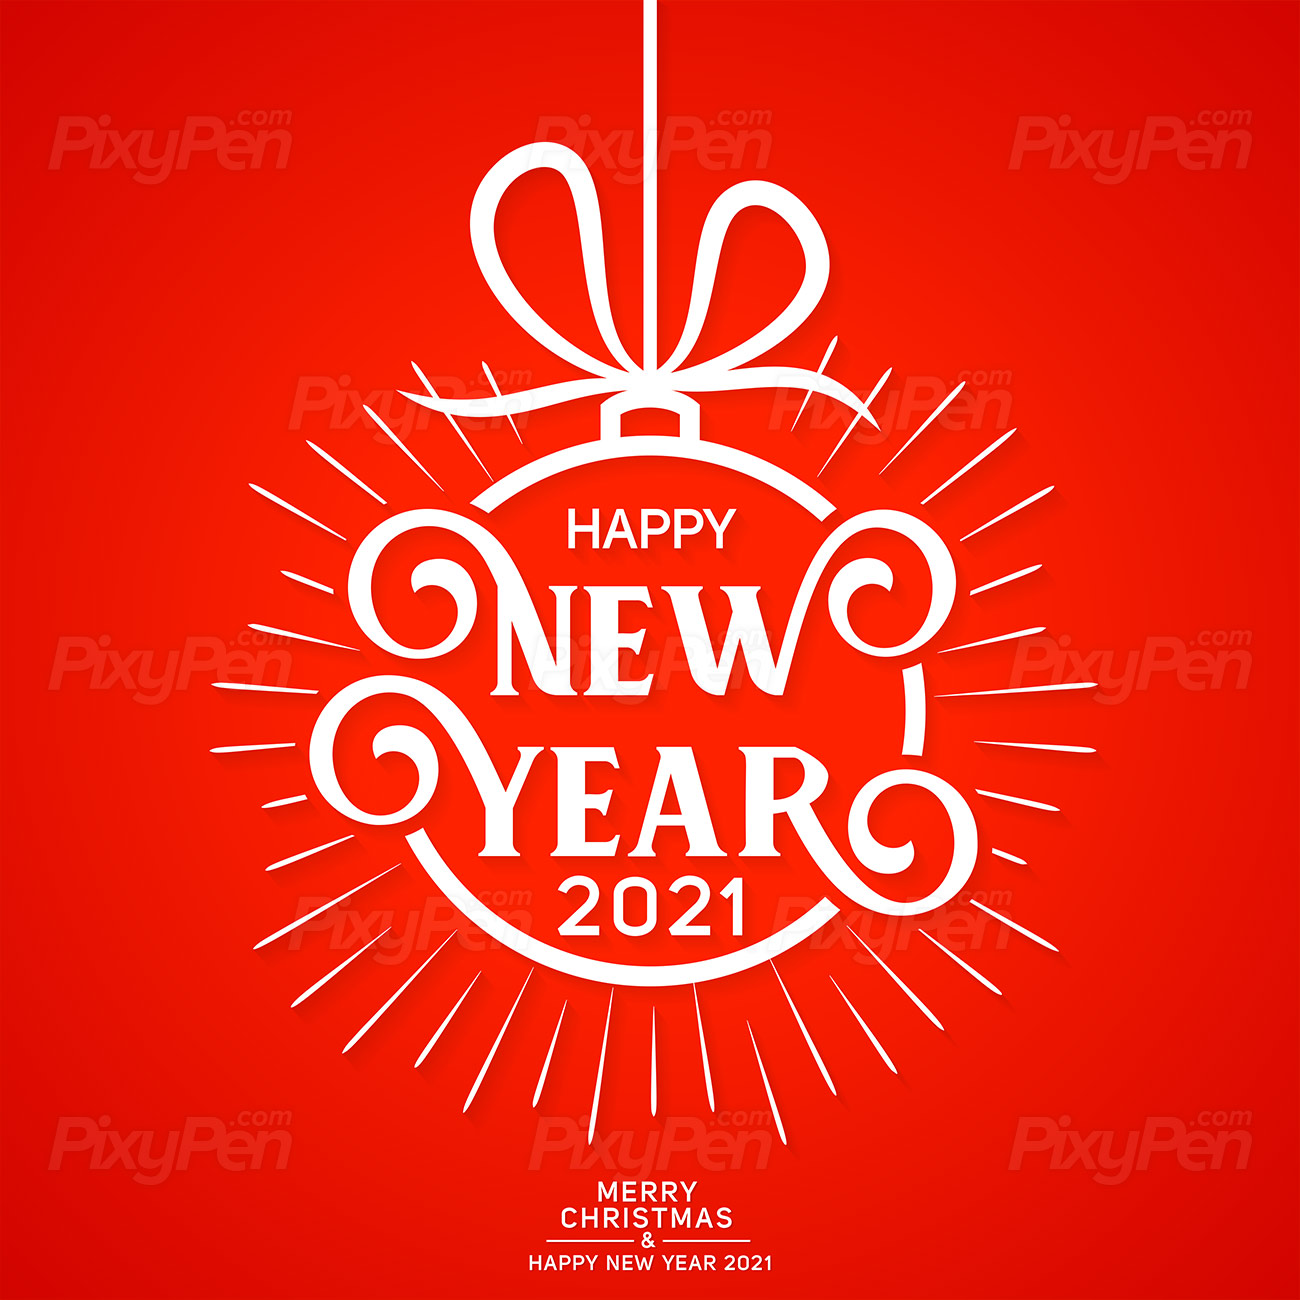 Happy New Year Merry Christmas 2021 Greeting Wallpapers